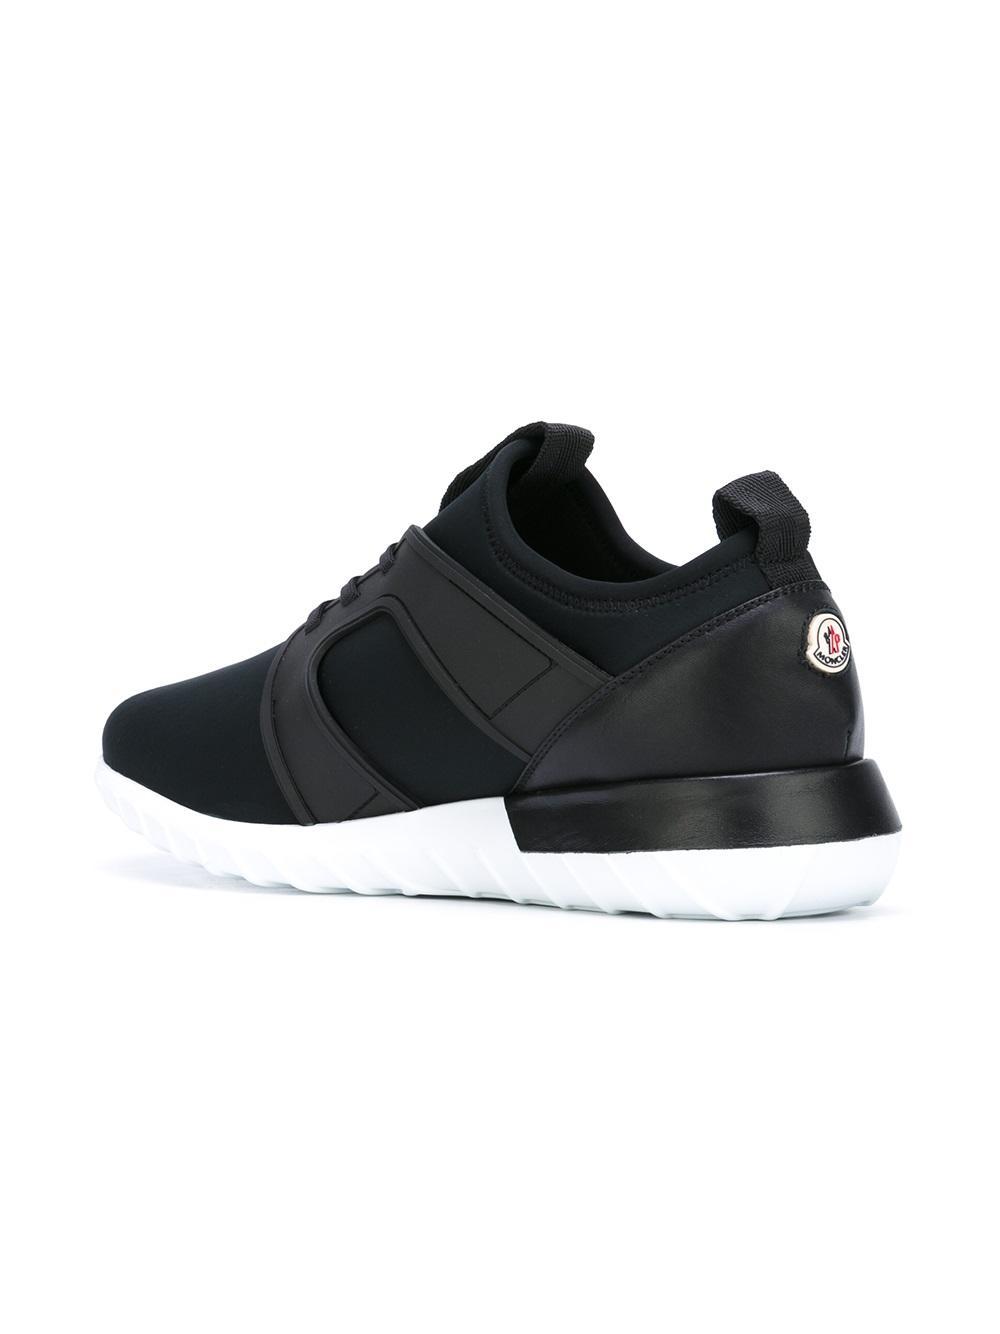 Moncler Emilien Leather Low-Top Sneakers in Black for Men | Lyst